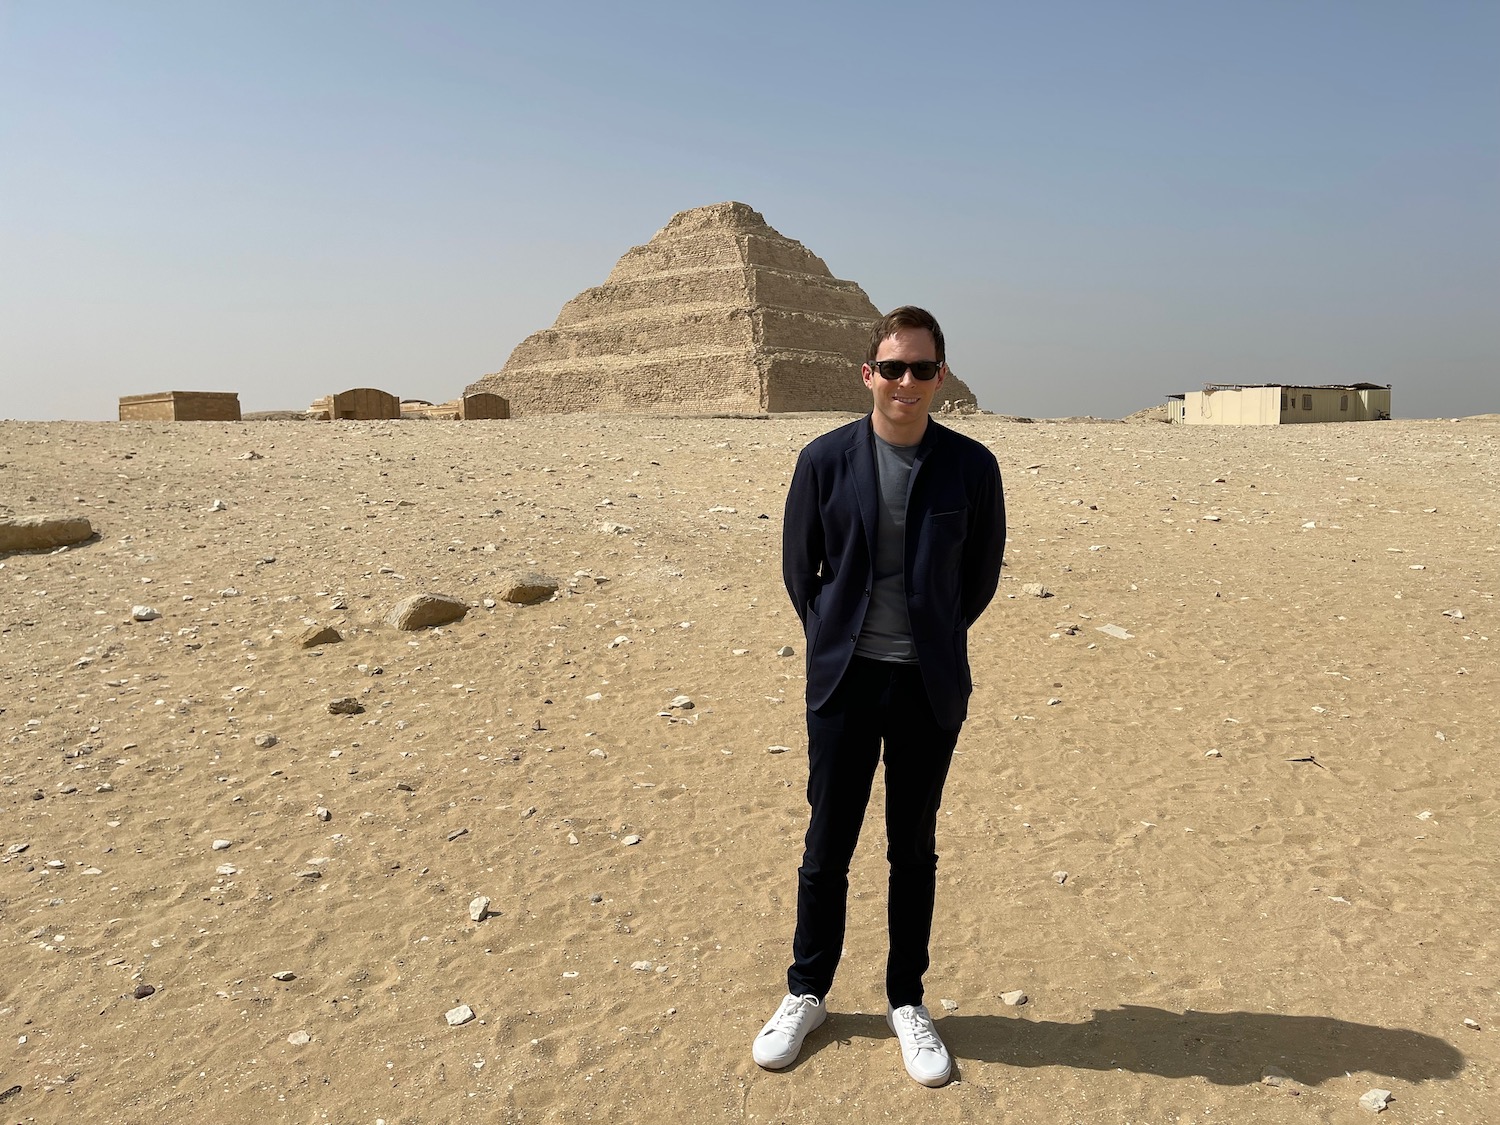 a man standing in a desert with a pyramid in the background